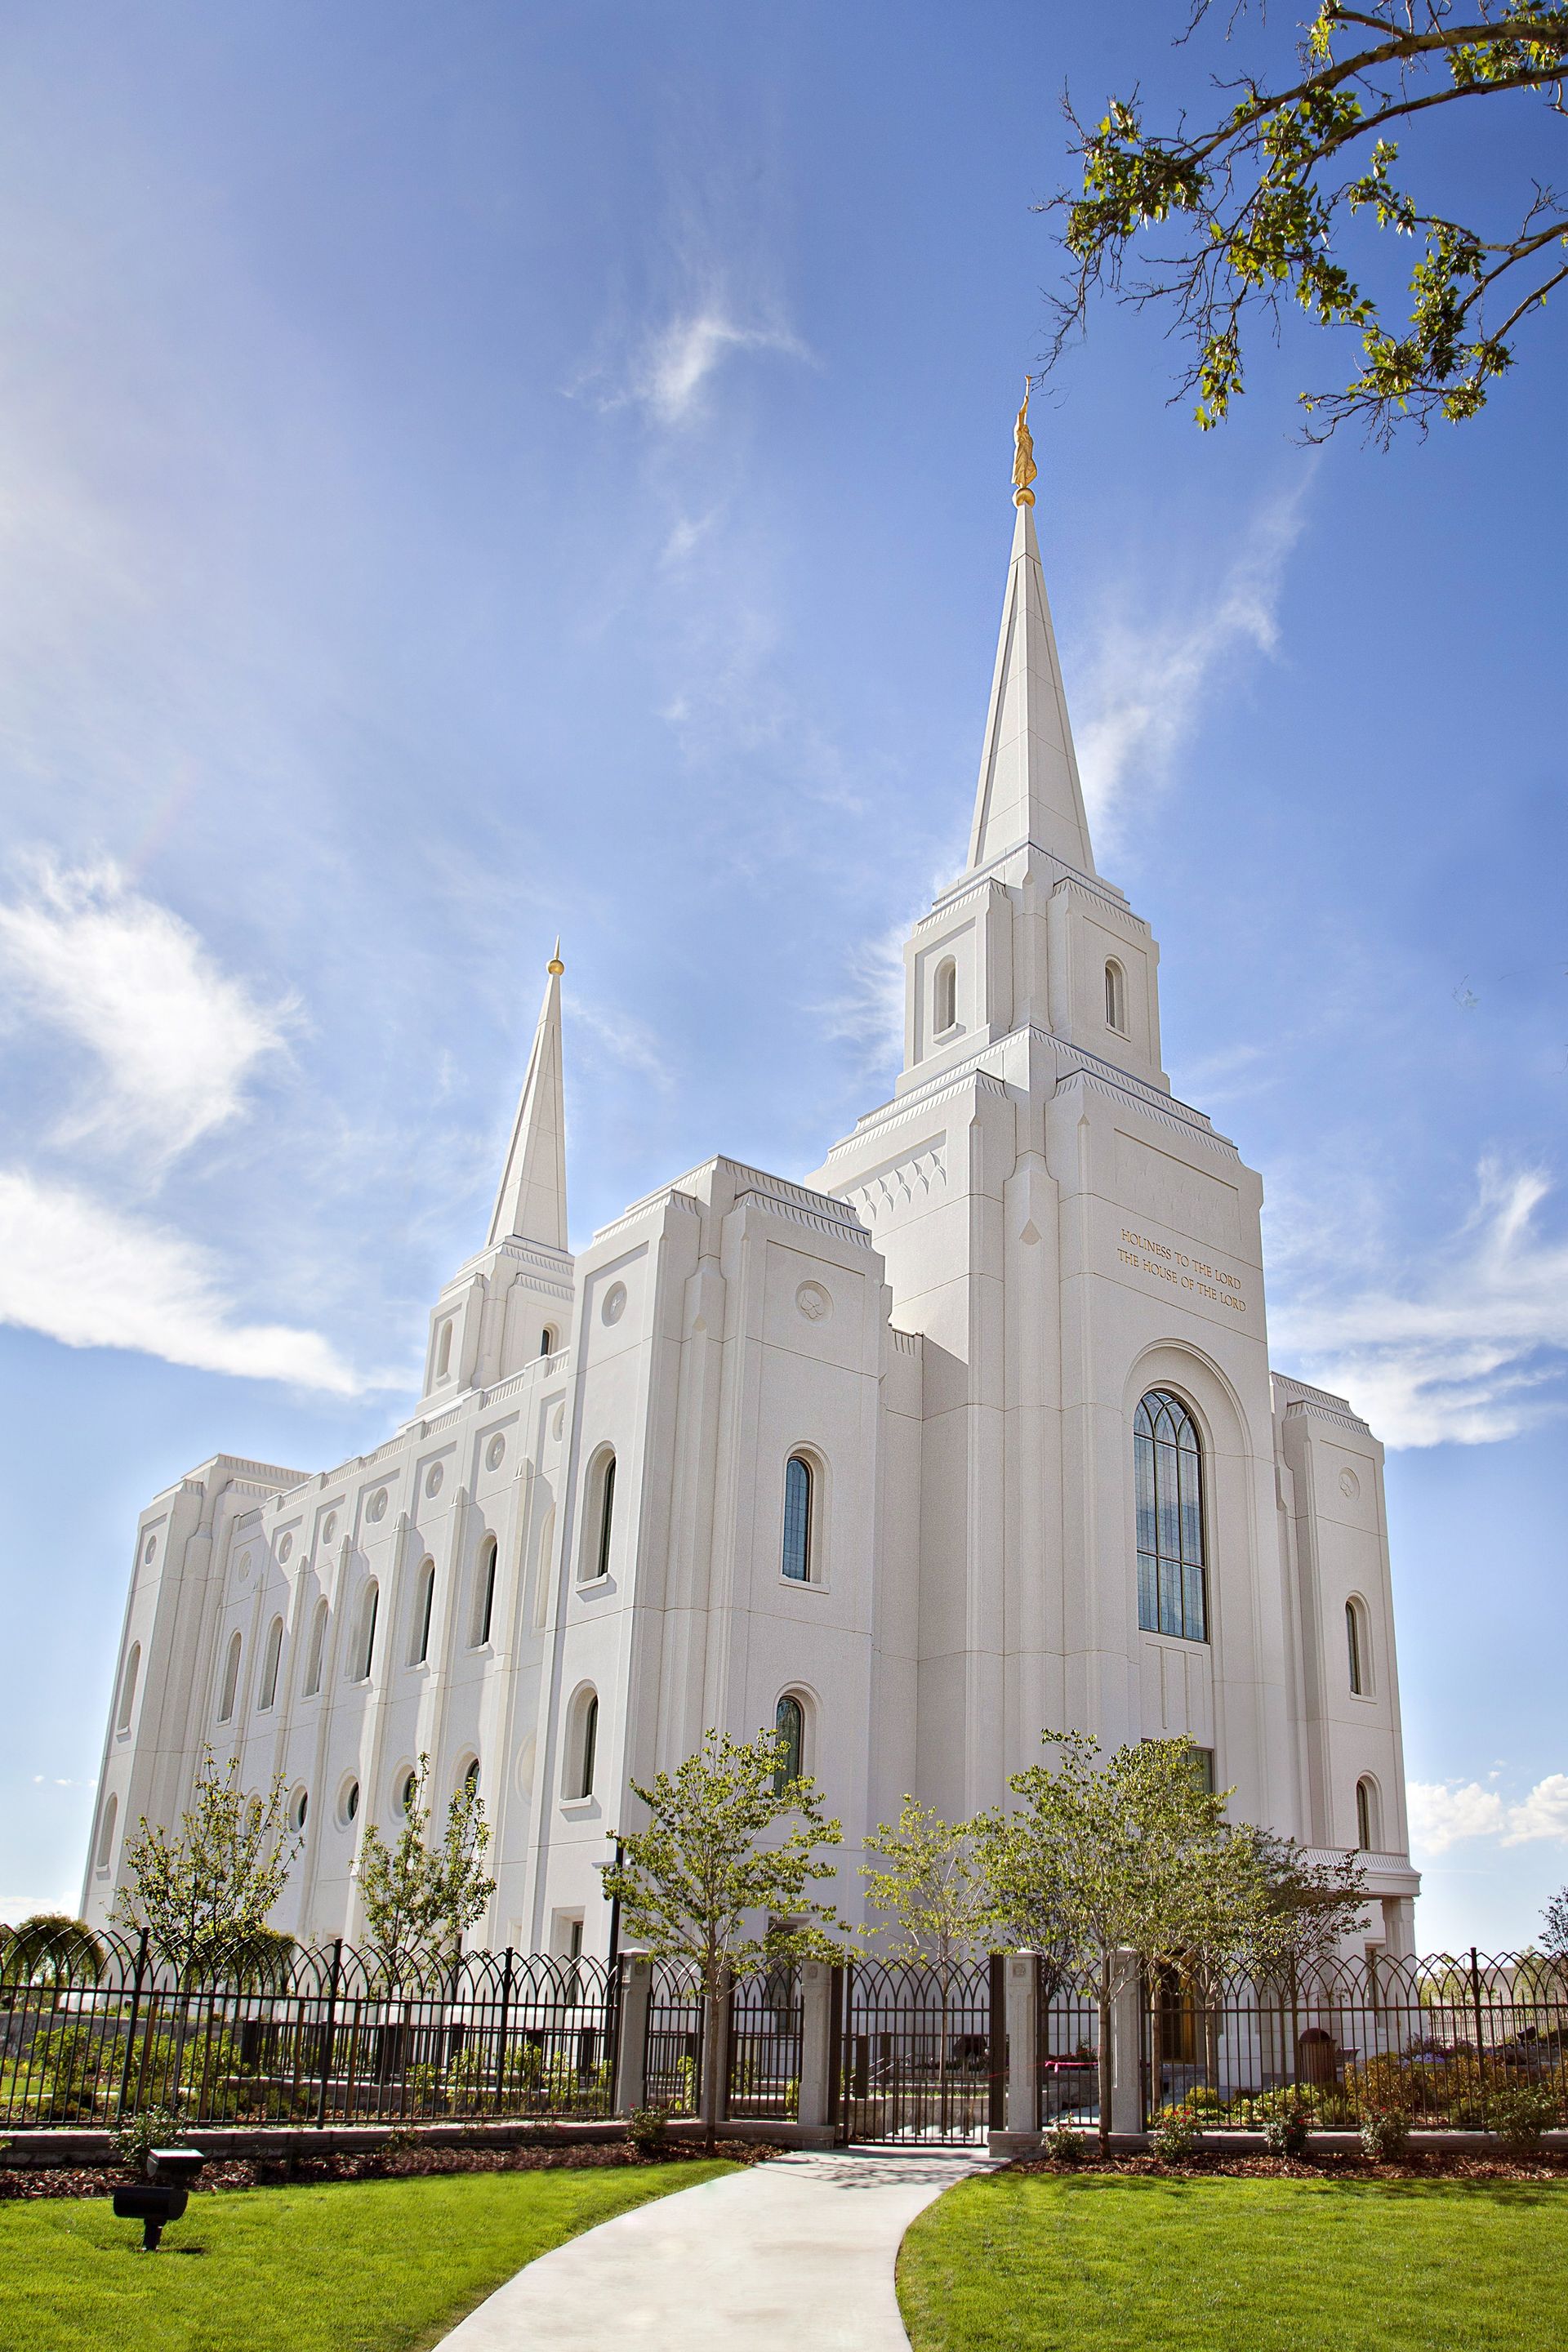 The Brigham City Utah Temple, including the scenery and entrance.